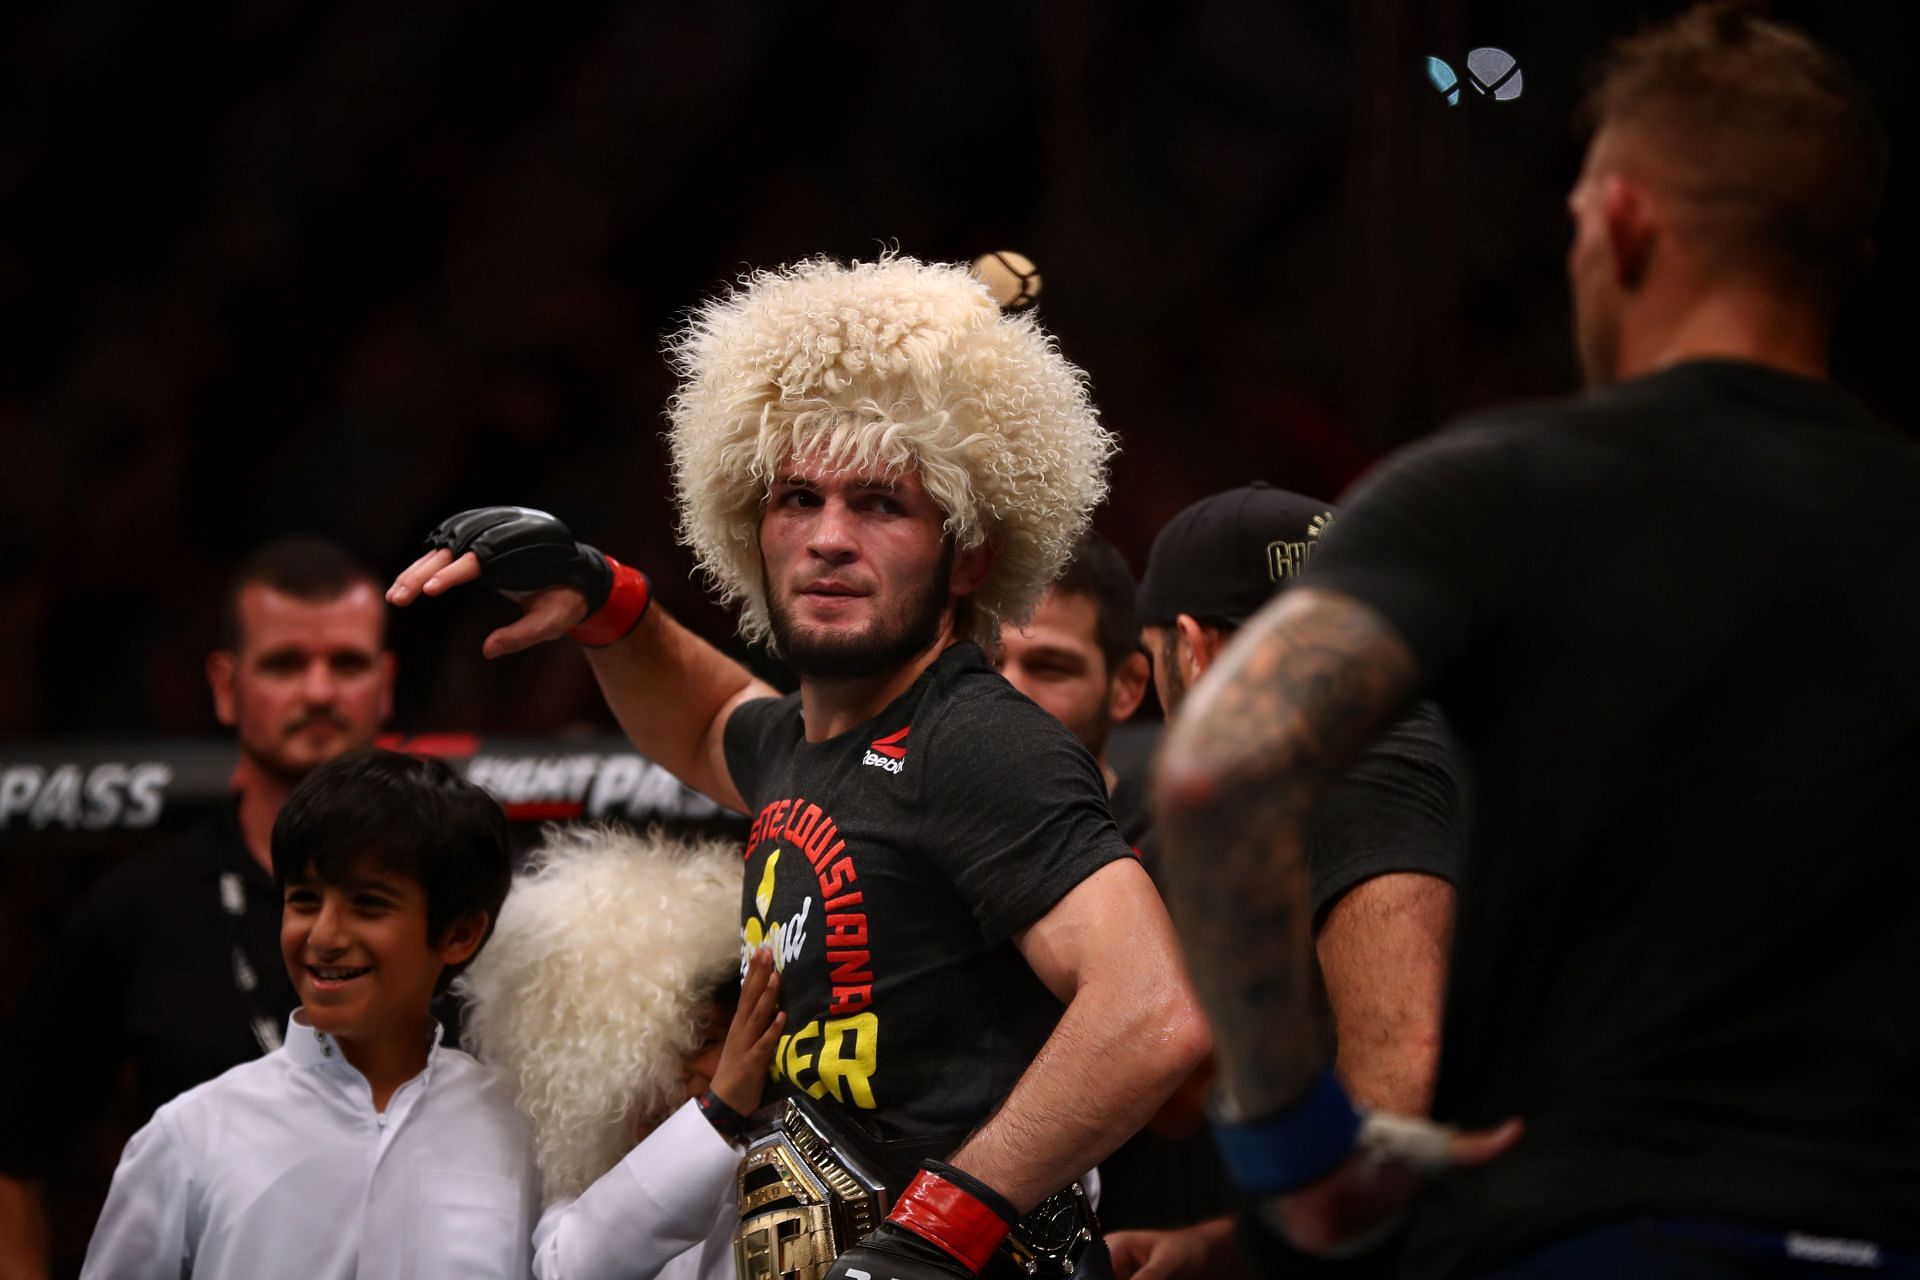 Khabib Nurmagomedov hung up his gloves with his undefeated record intact